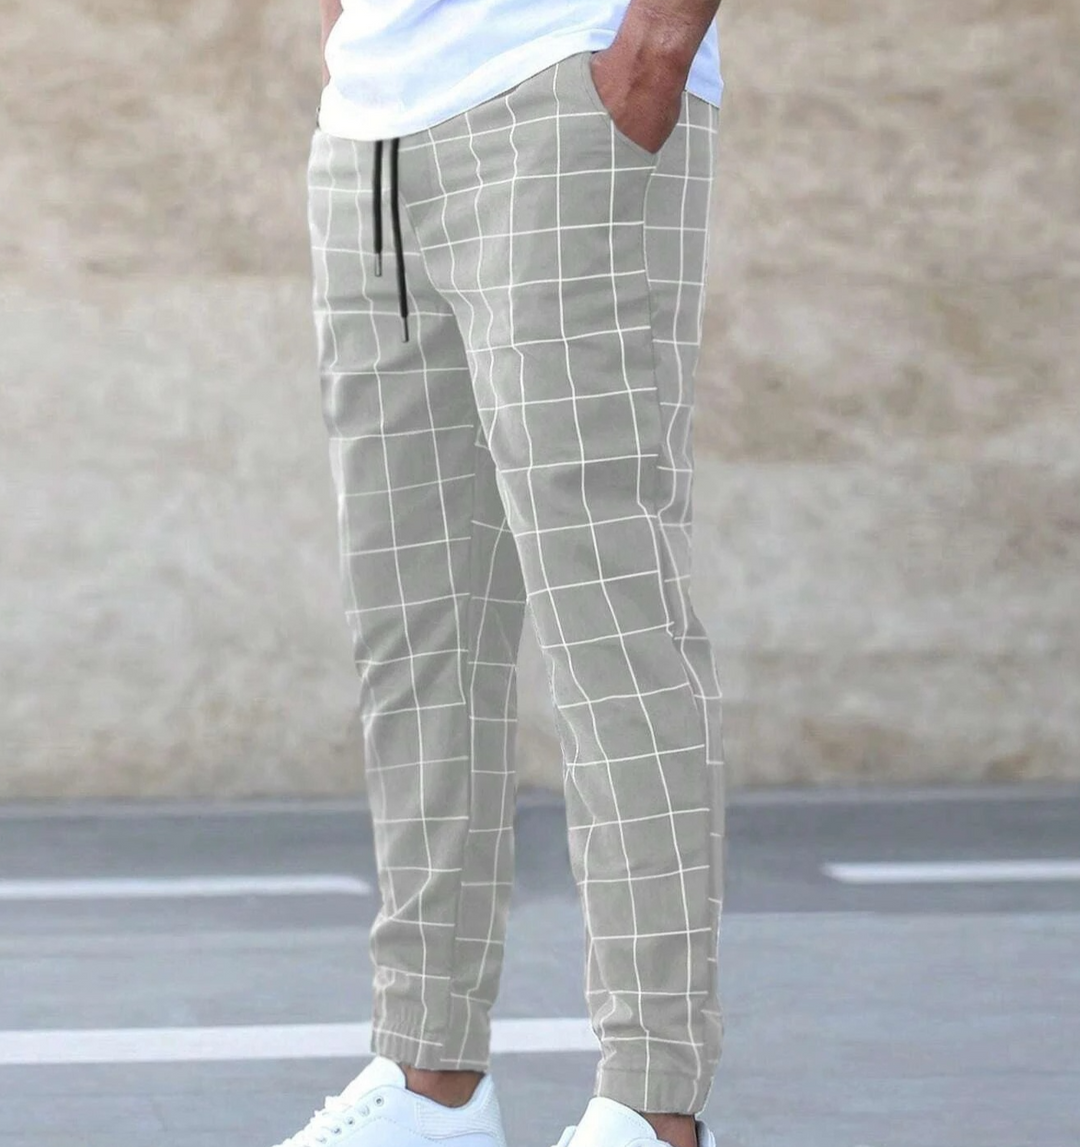 Daryll | Trendy Men's Trousers for Everyday